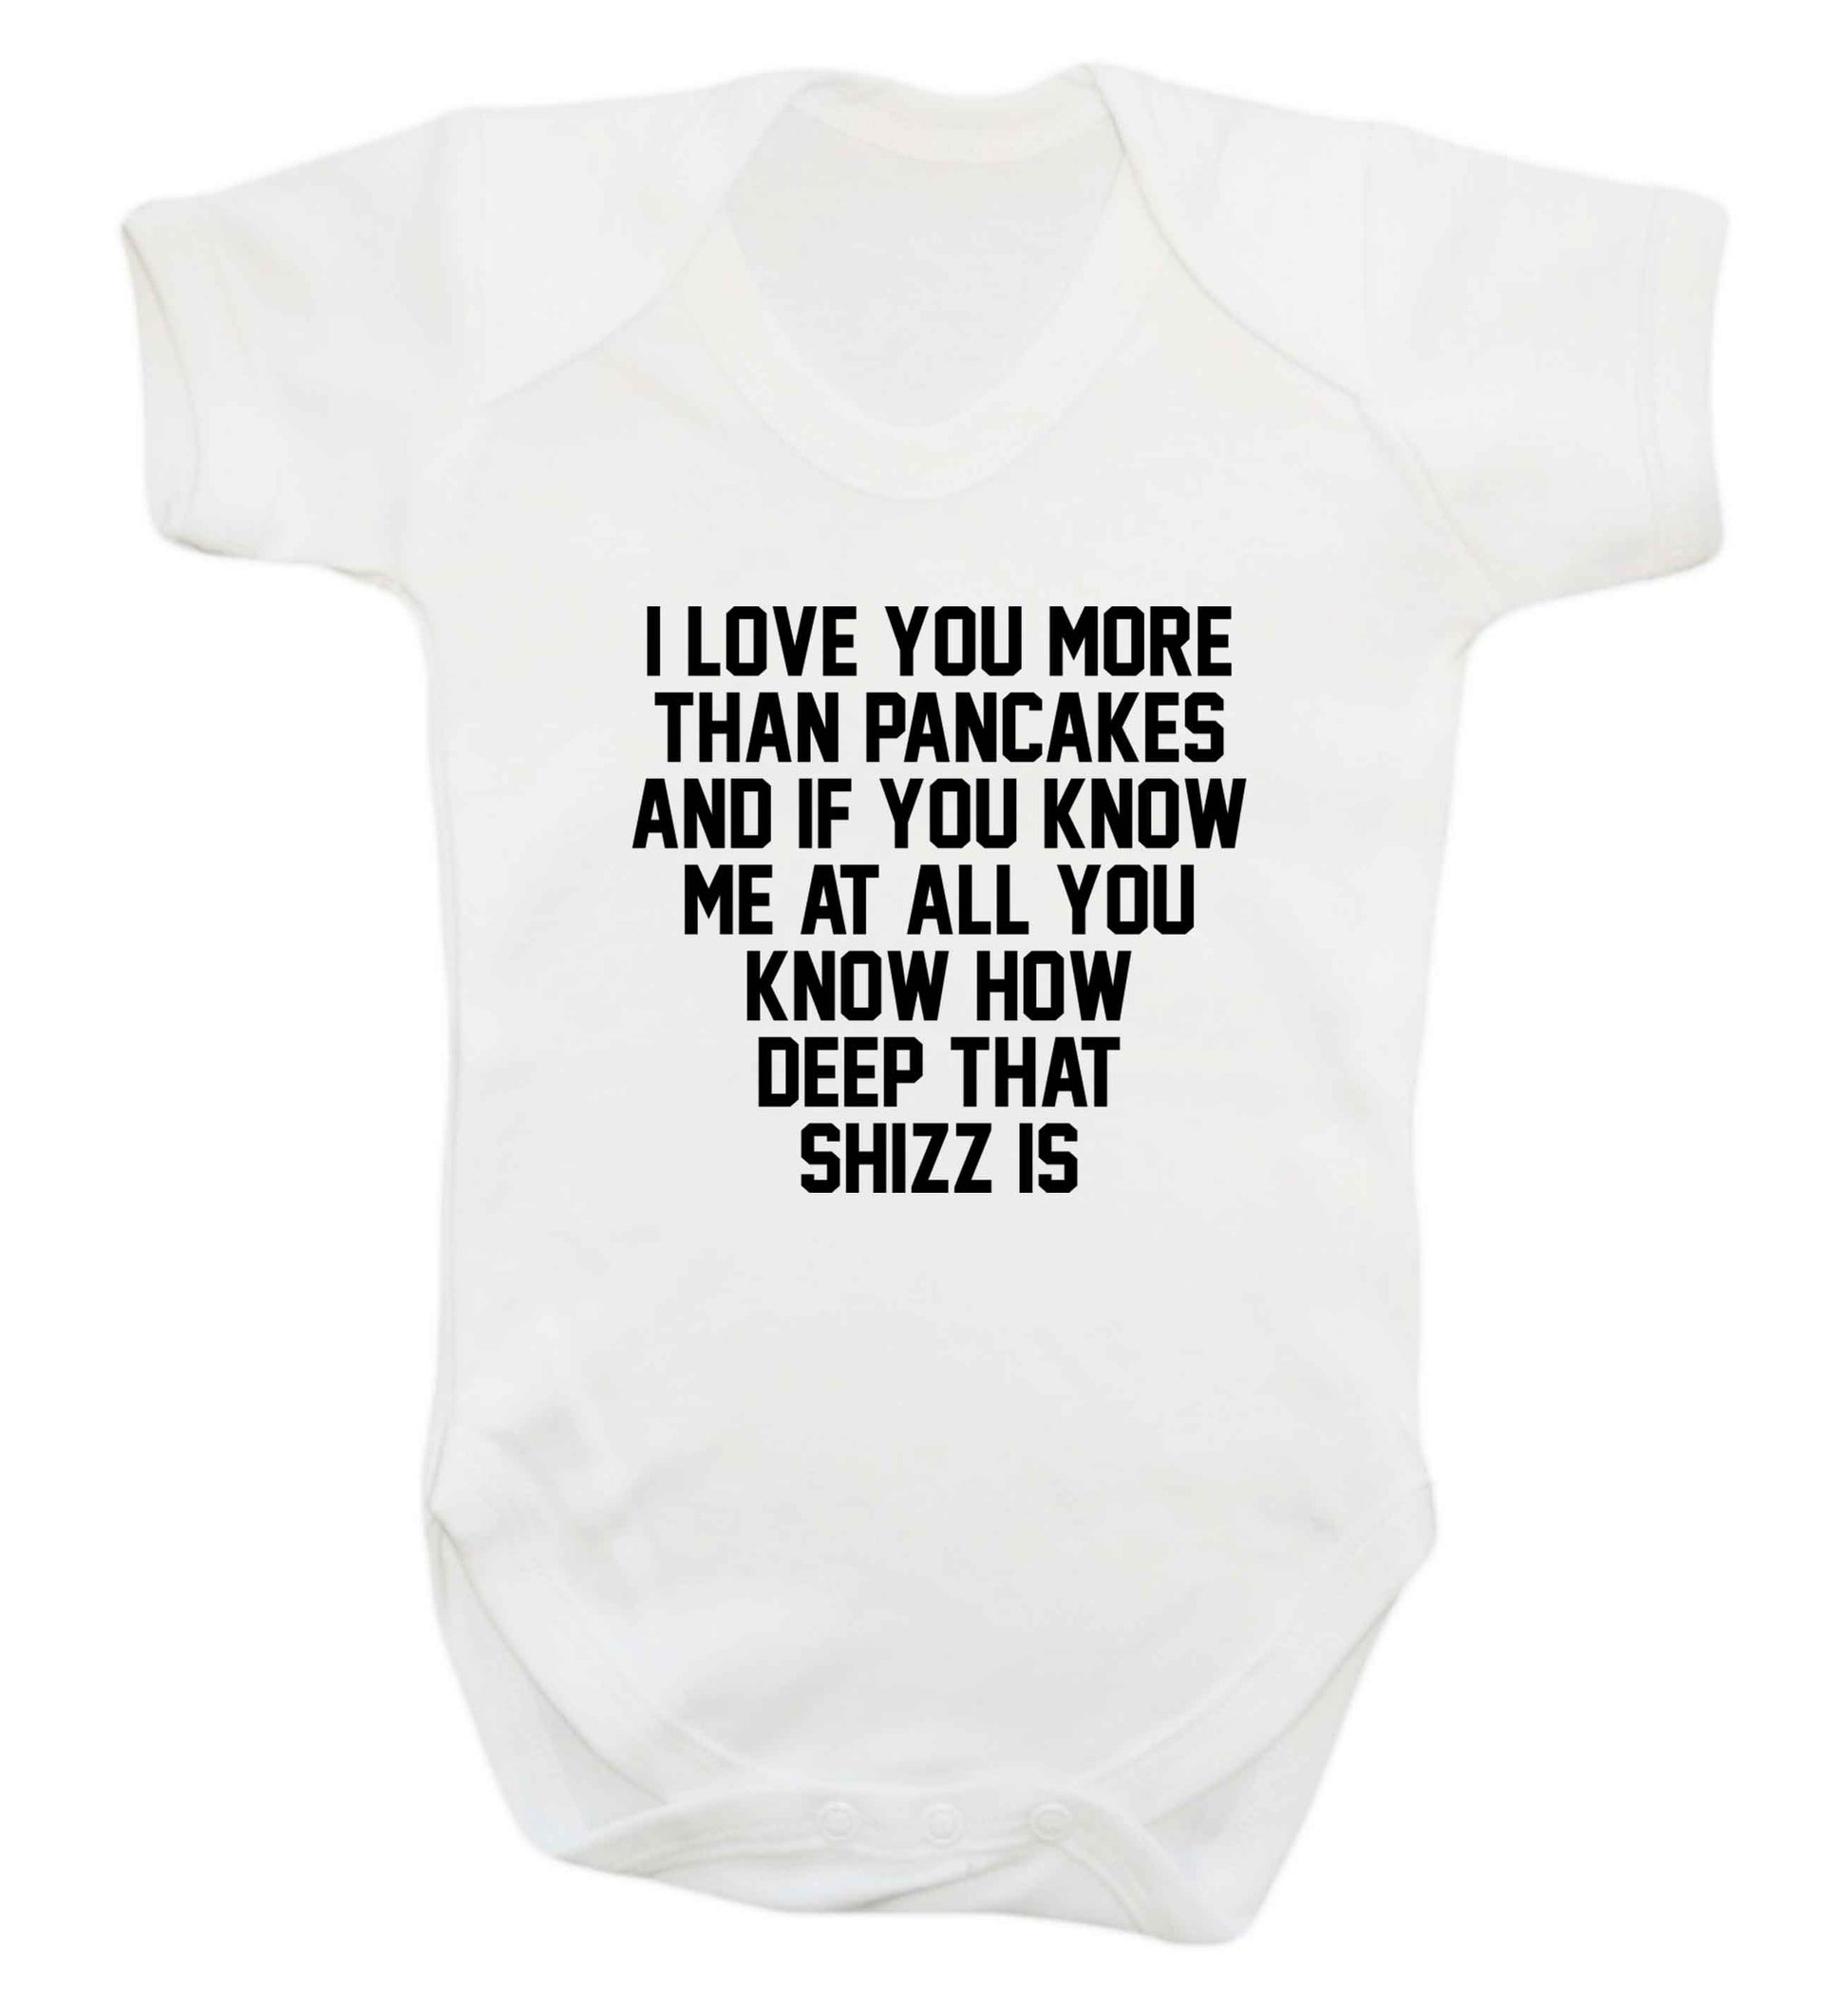 I love you more than pancakes and if you know me at all you know how deep that shizz is baby vest white 18-24 months